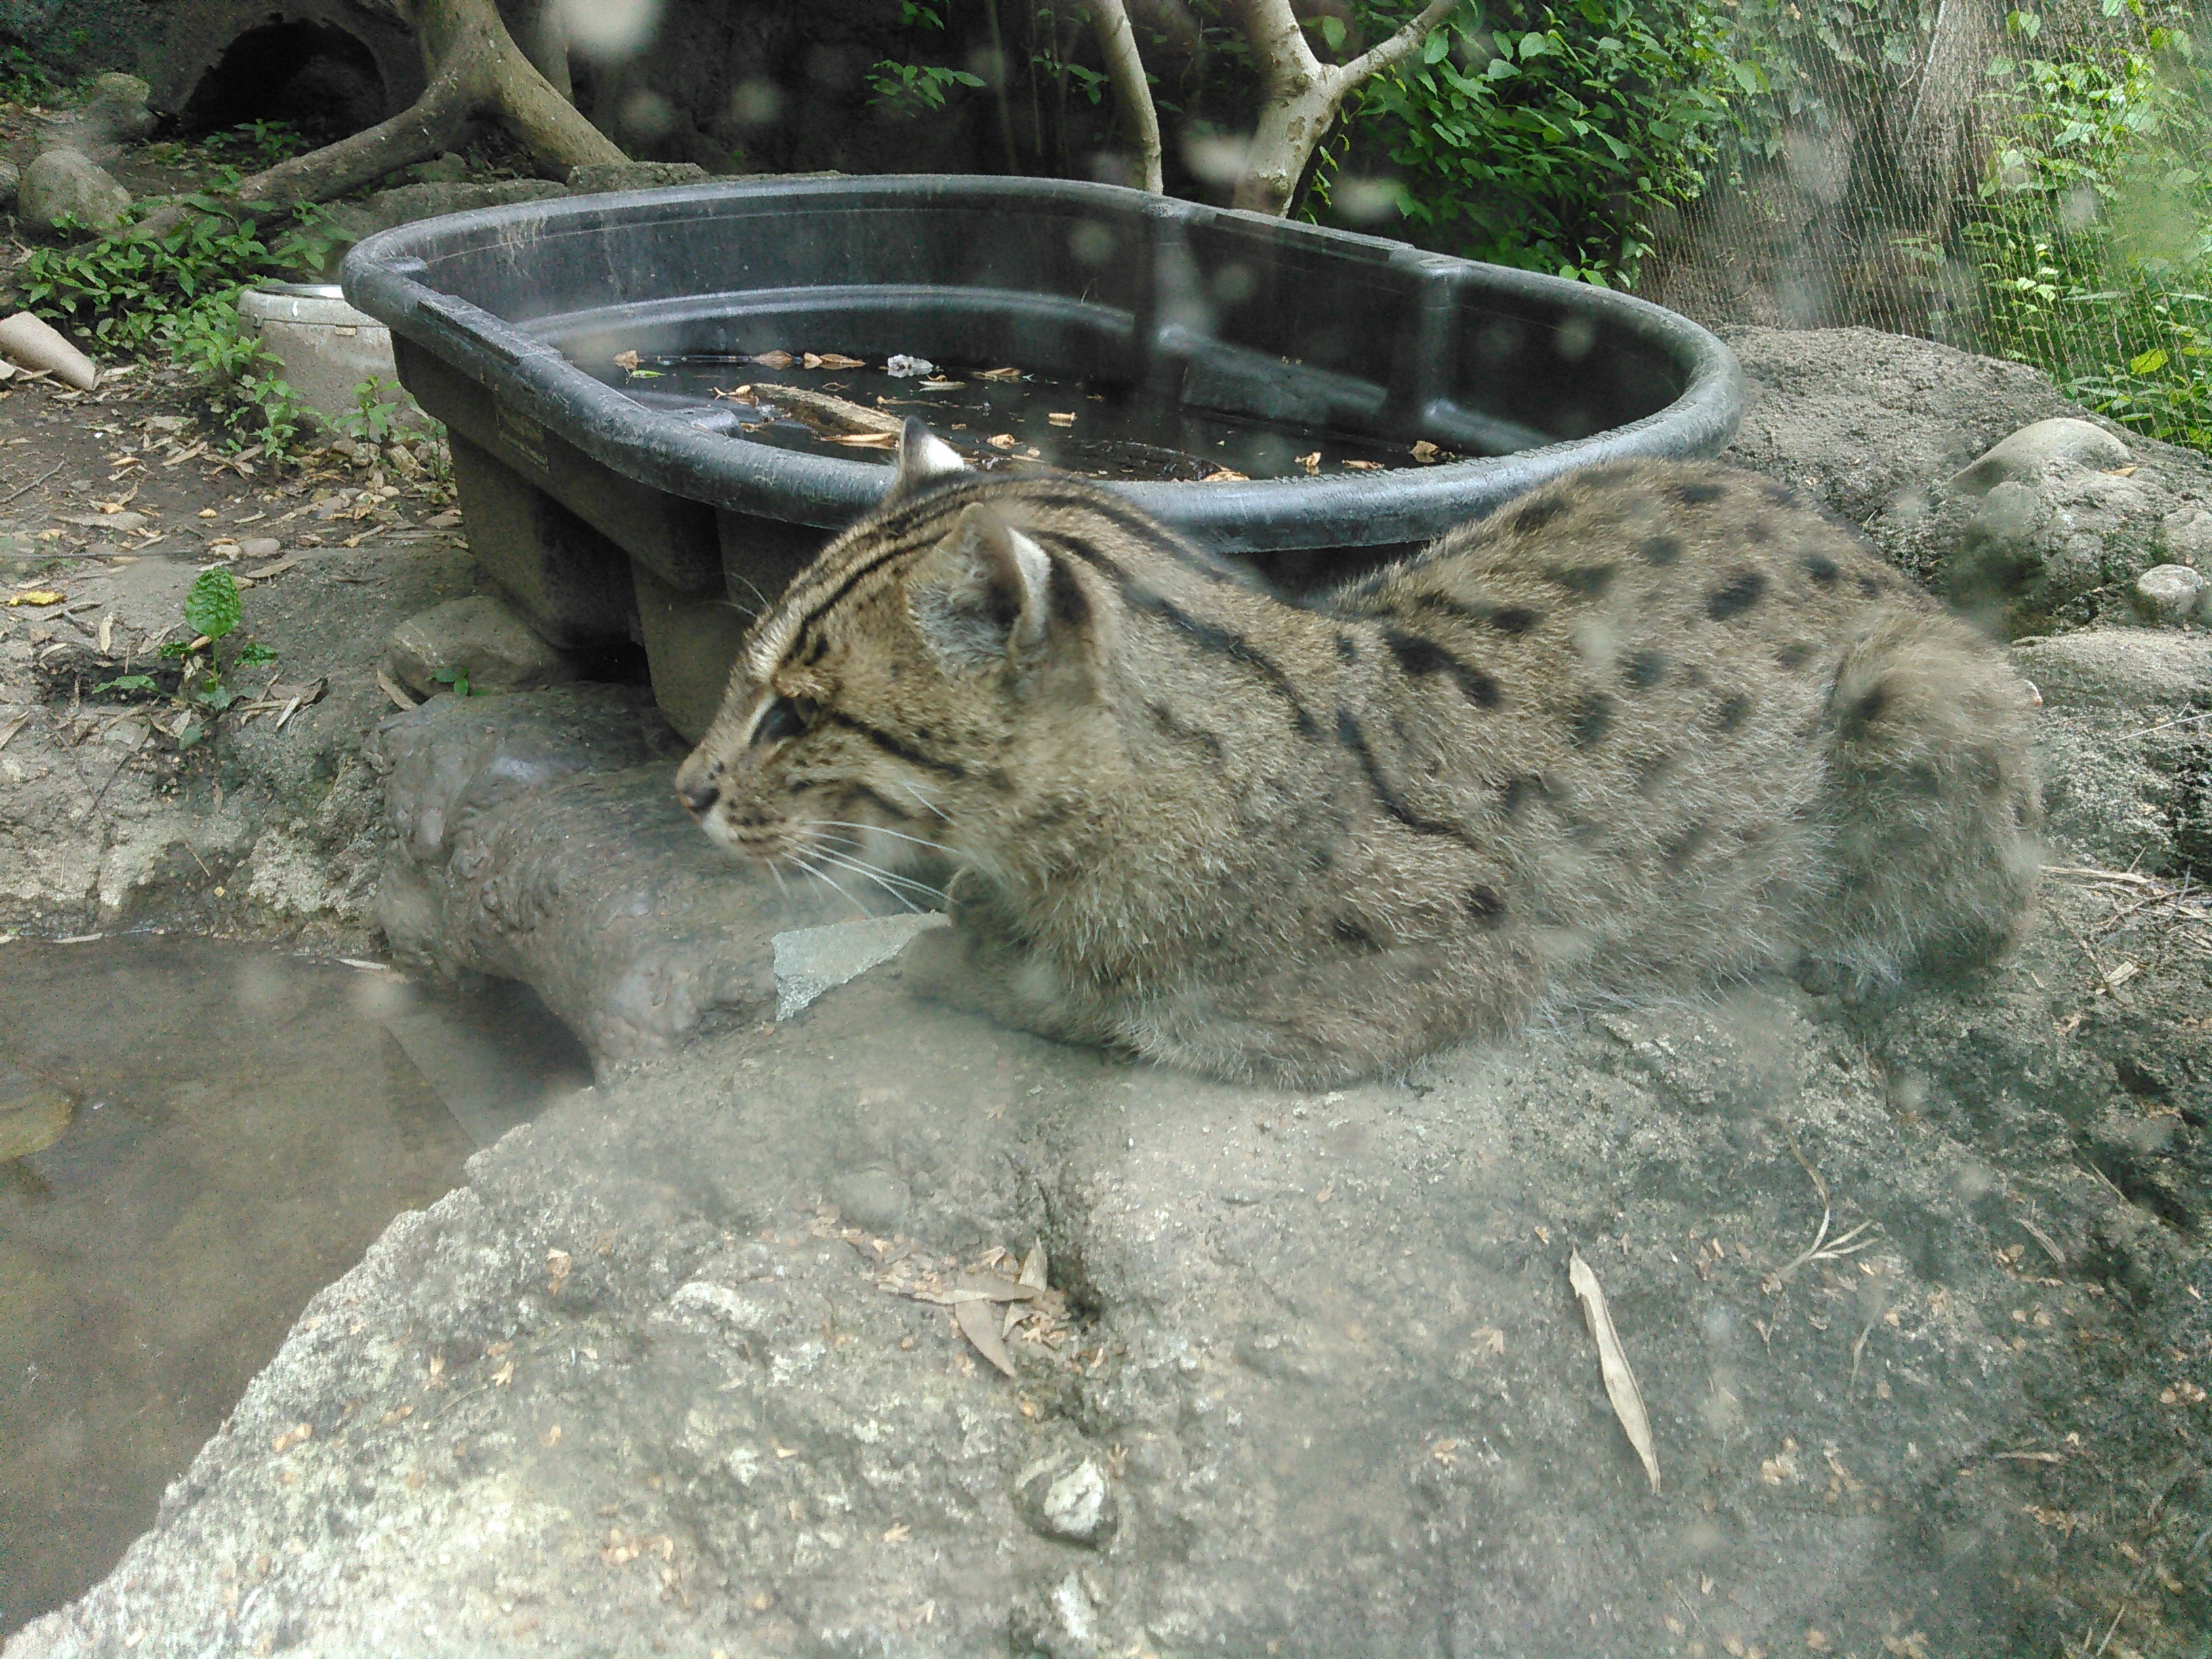 Fishing Cat at the National Zoo